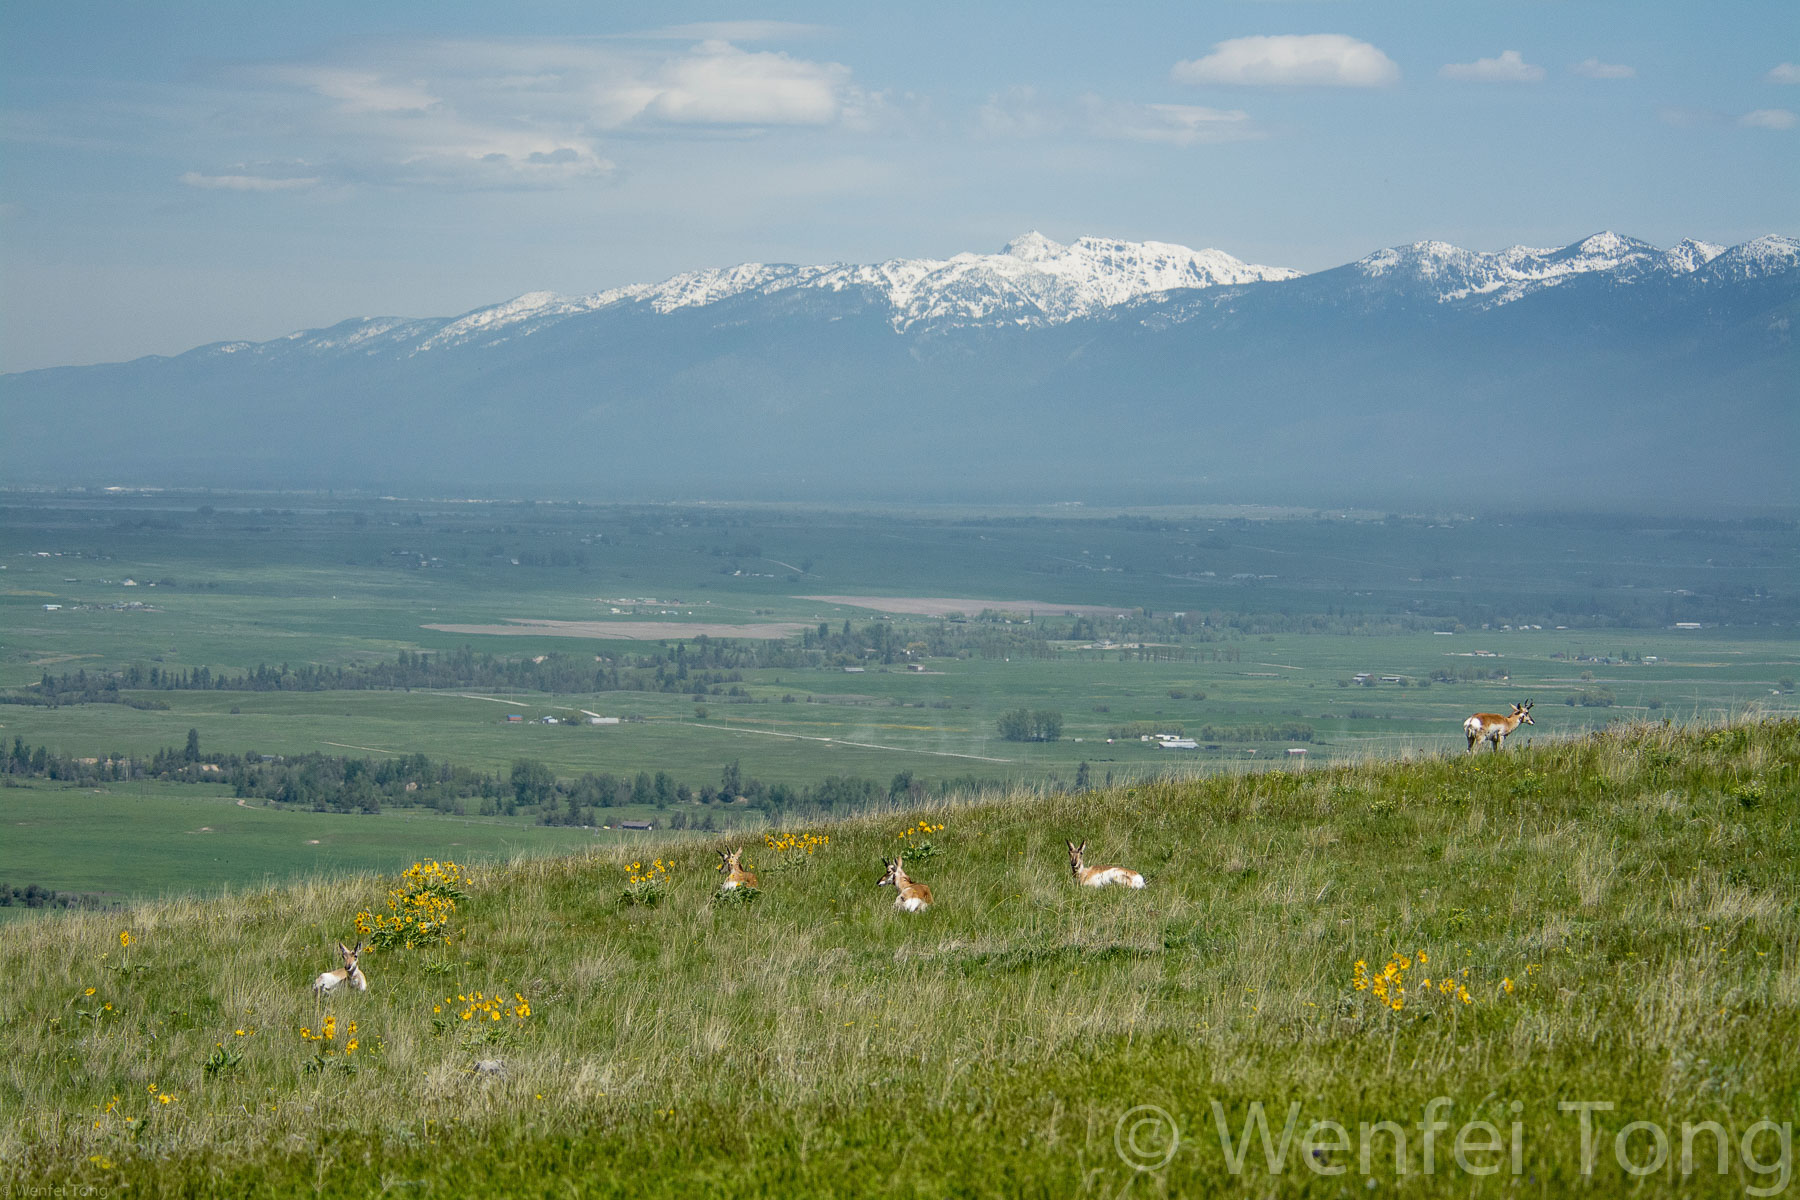 Pronghorn herd with the Missions in the background